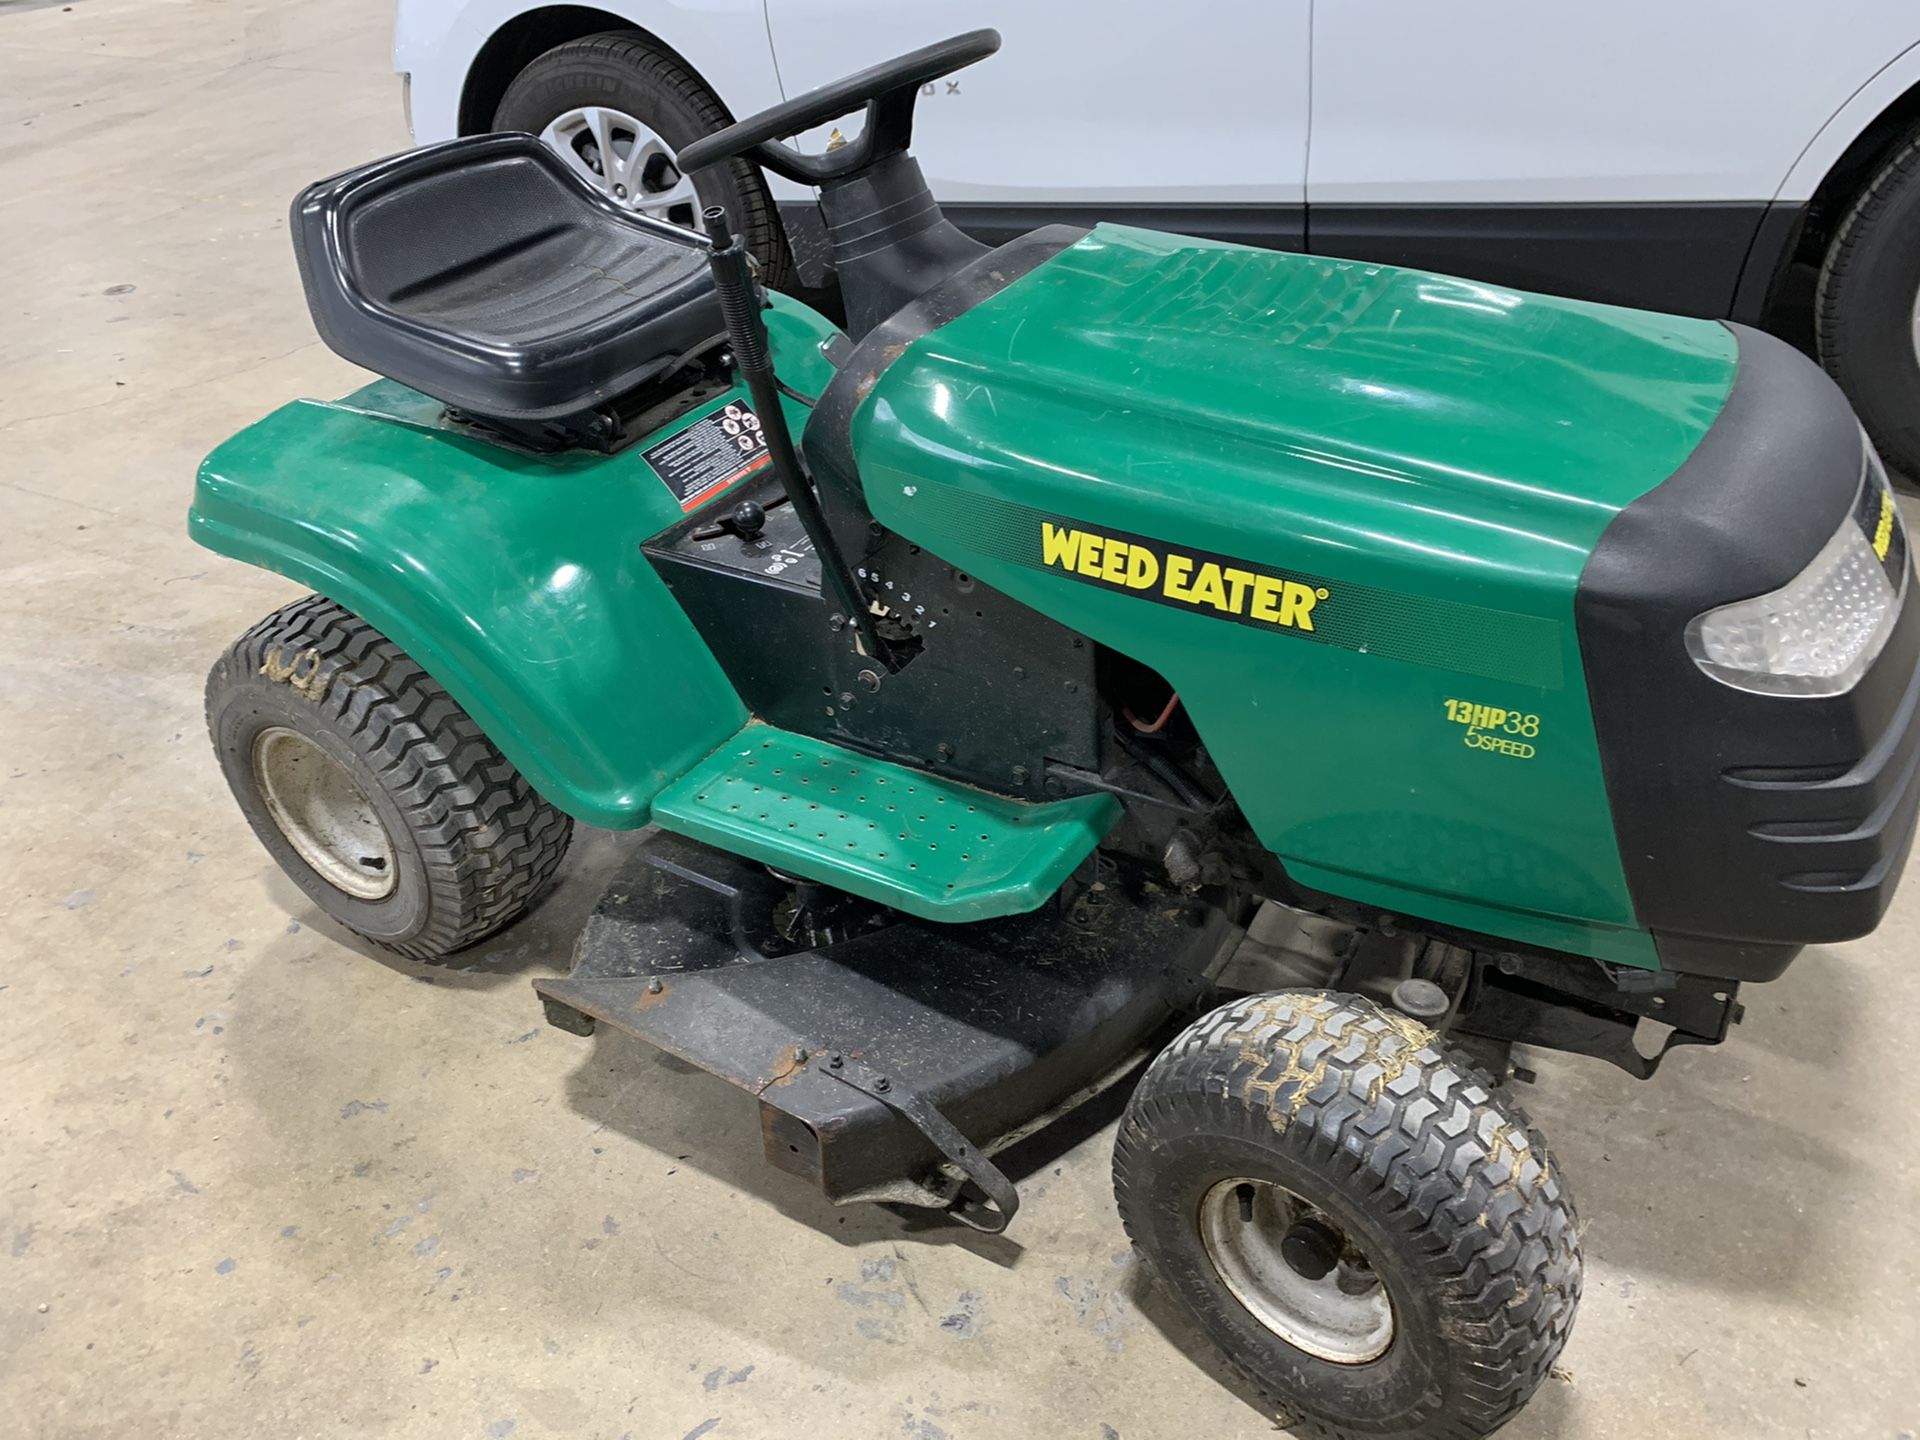 Weed Eater 13hp 5speed Riding Mower